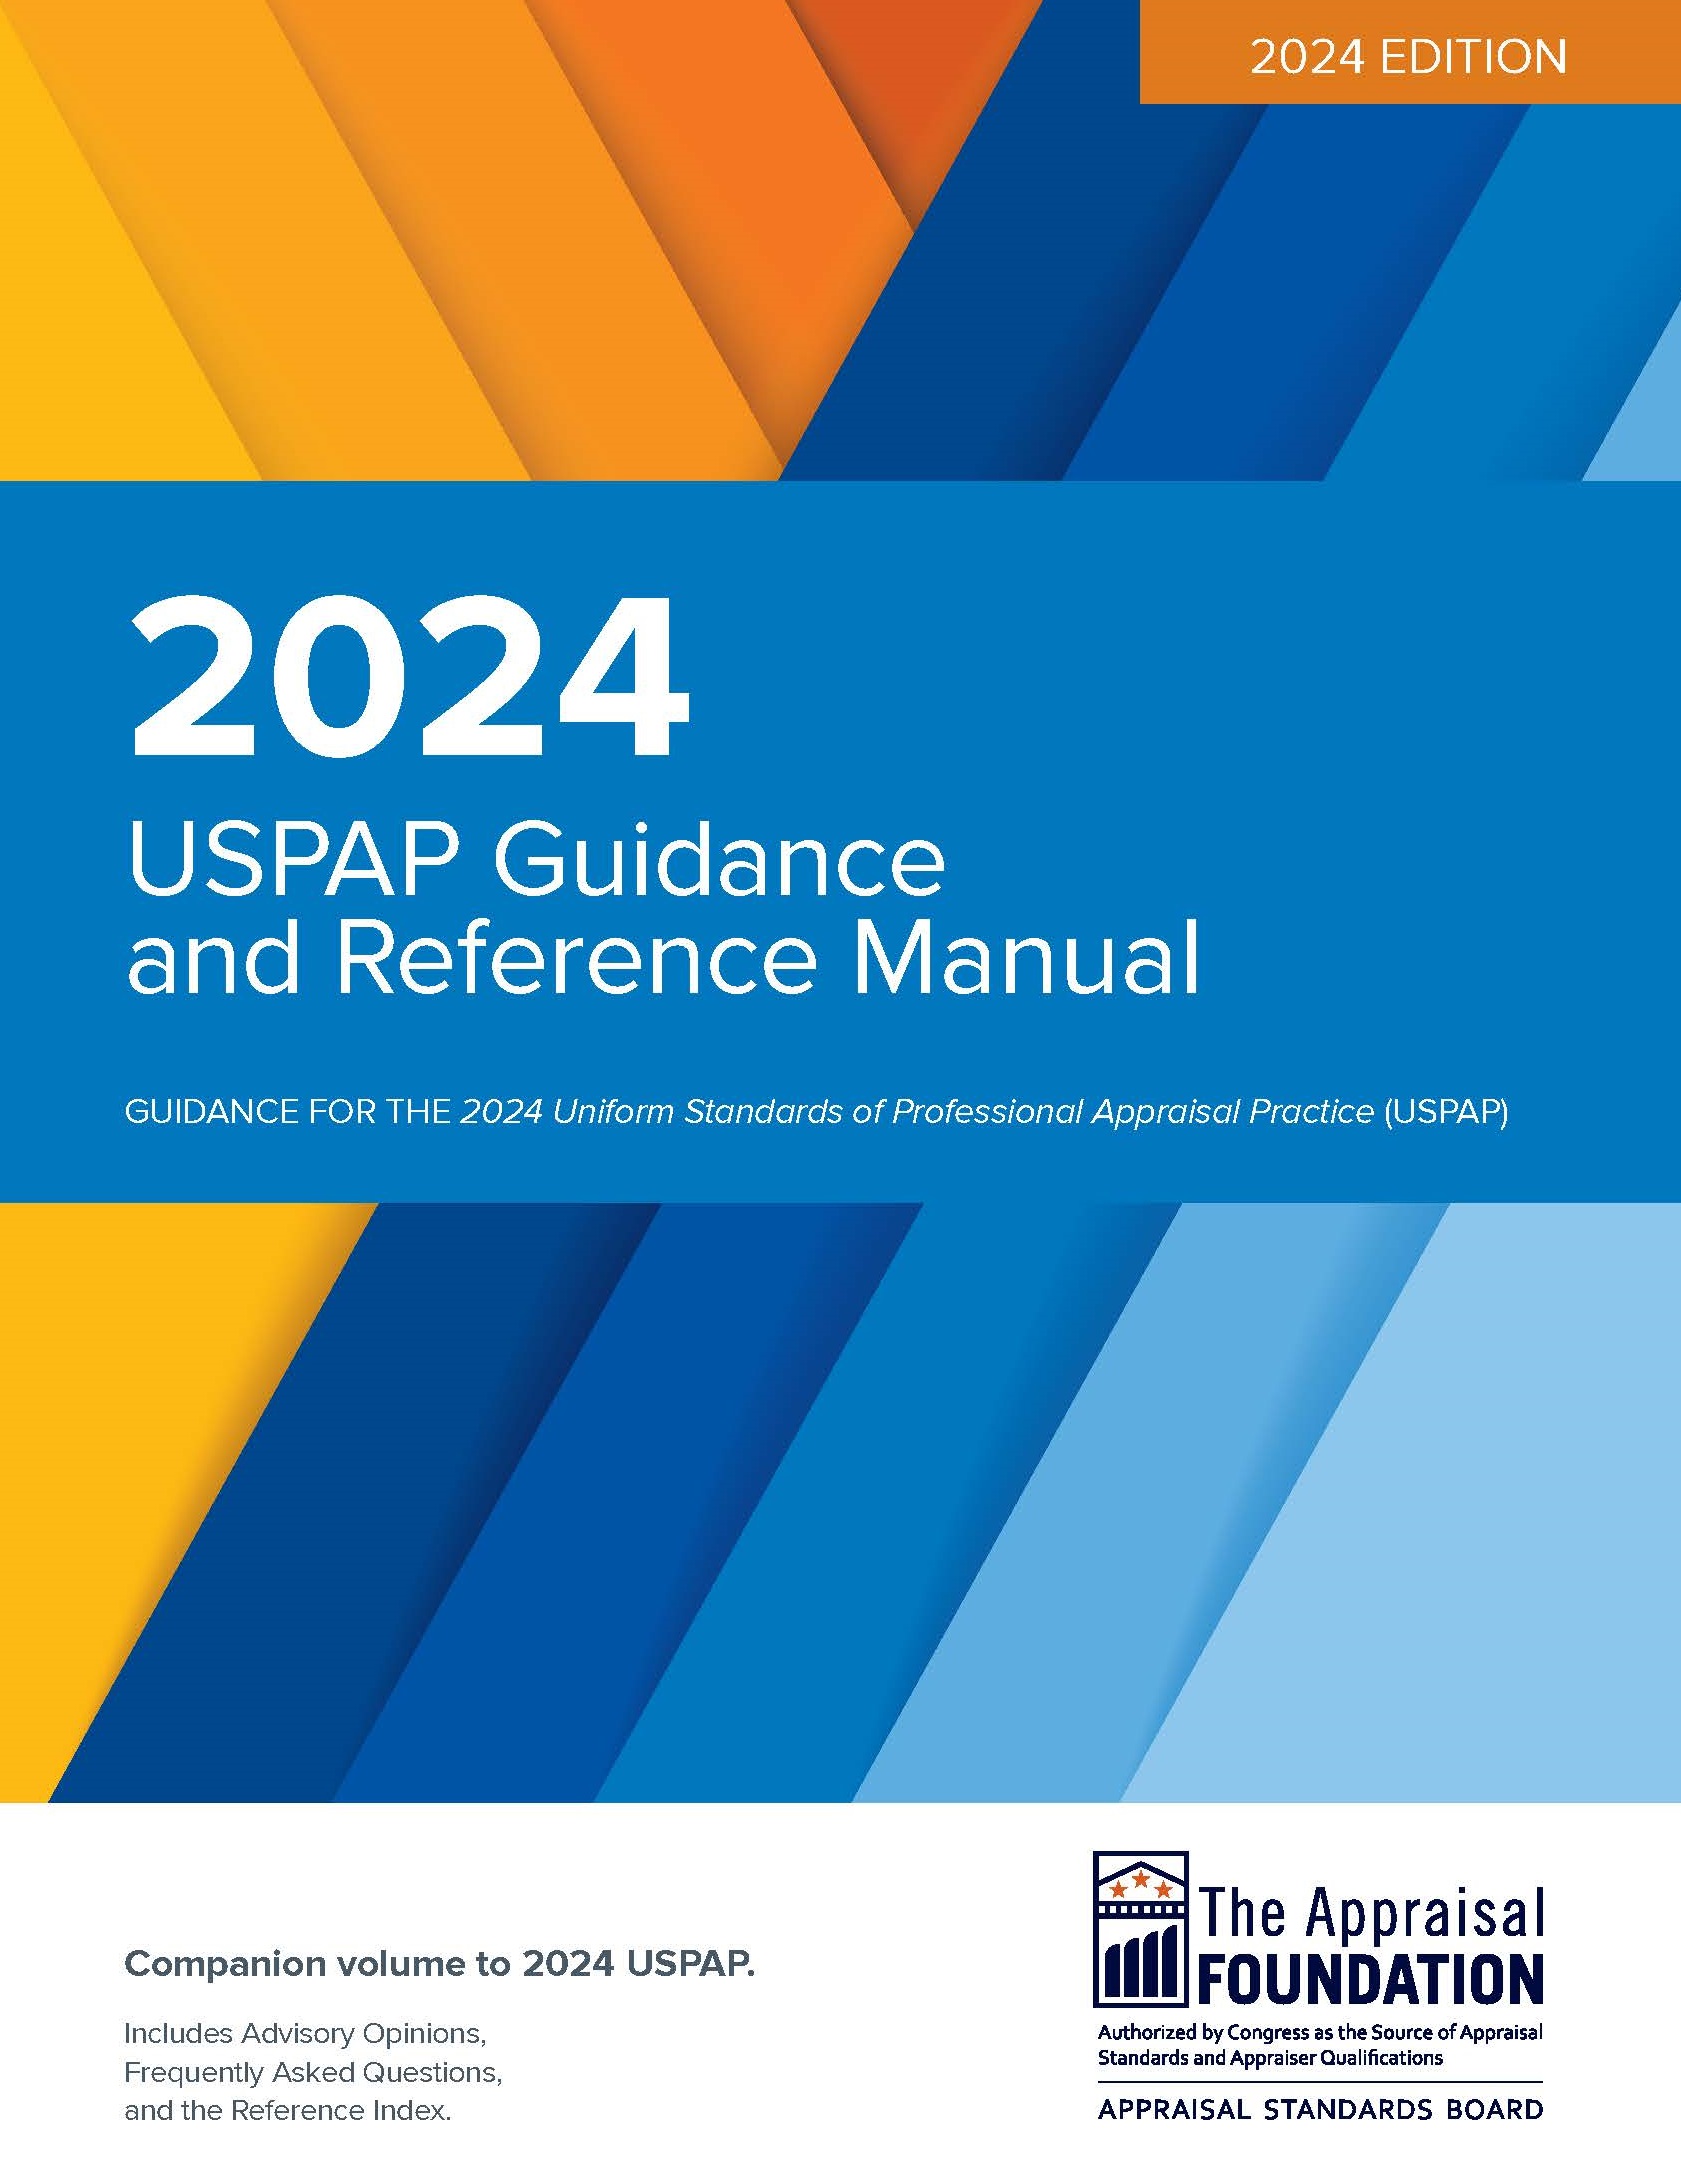 2024 USPAP Guidance and Reference Manual (PRINT) - $75